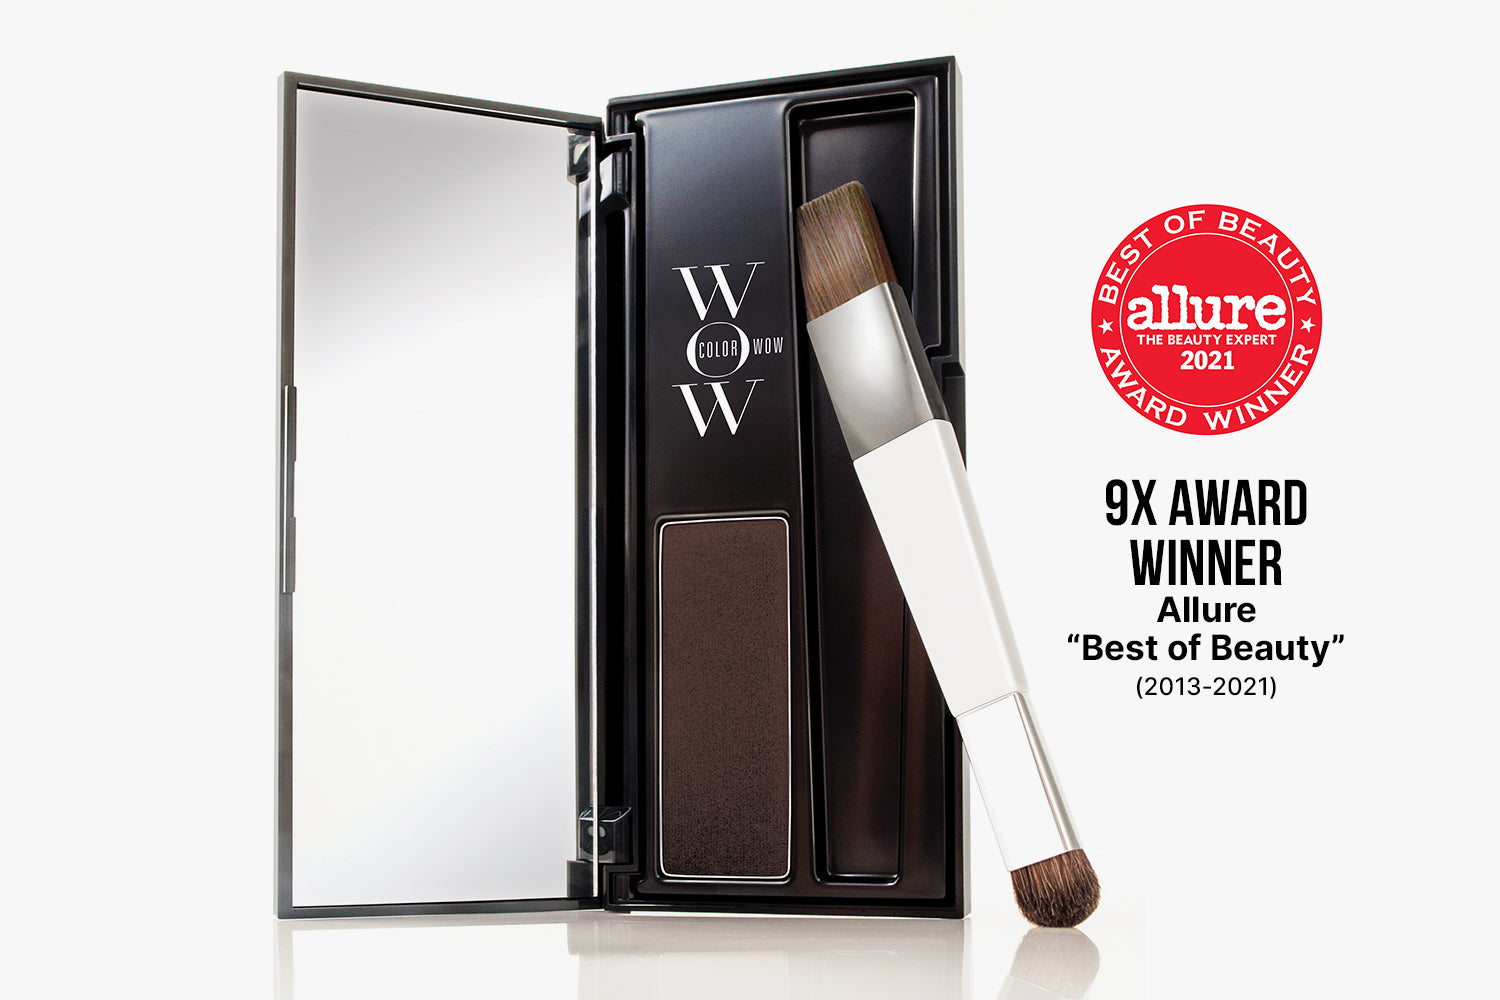 Root Cover Up is a 9-time award winner of Allure “Best of Beauty” (2013-2021). 